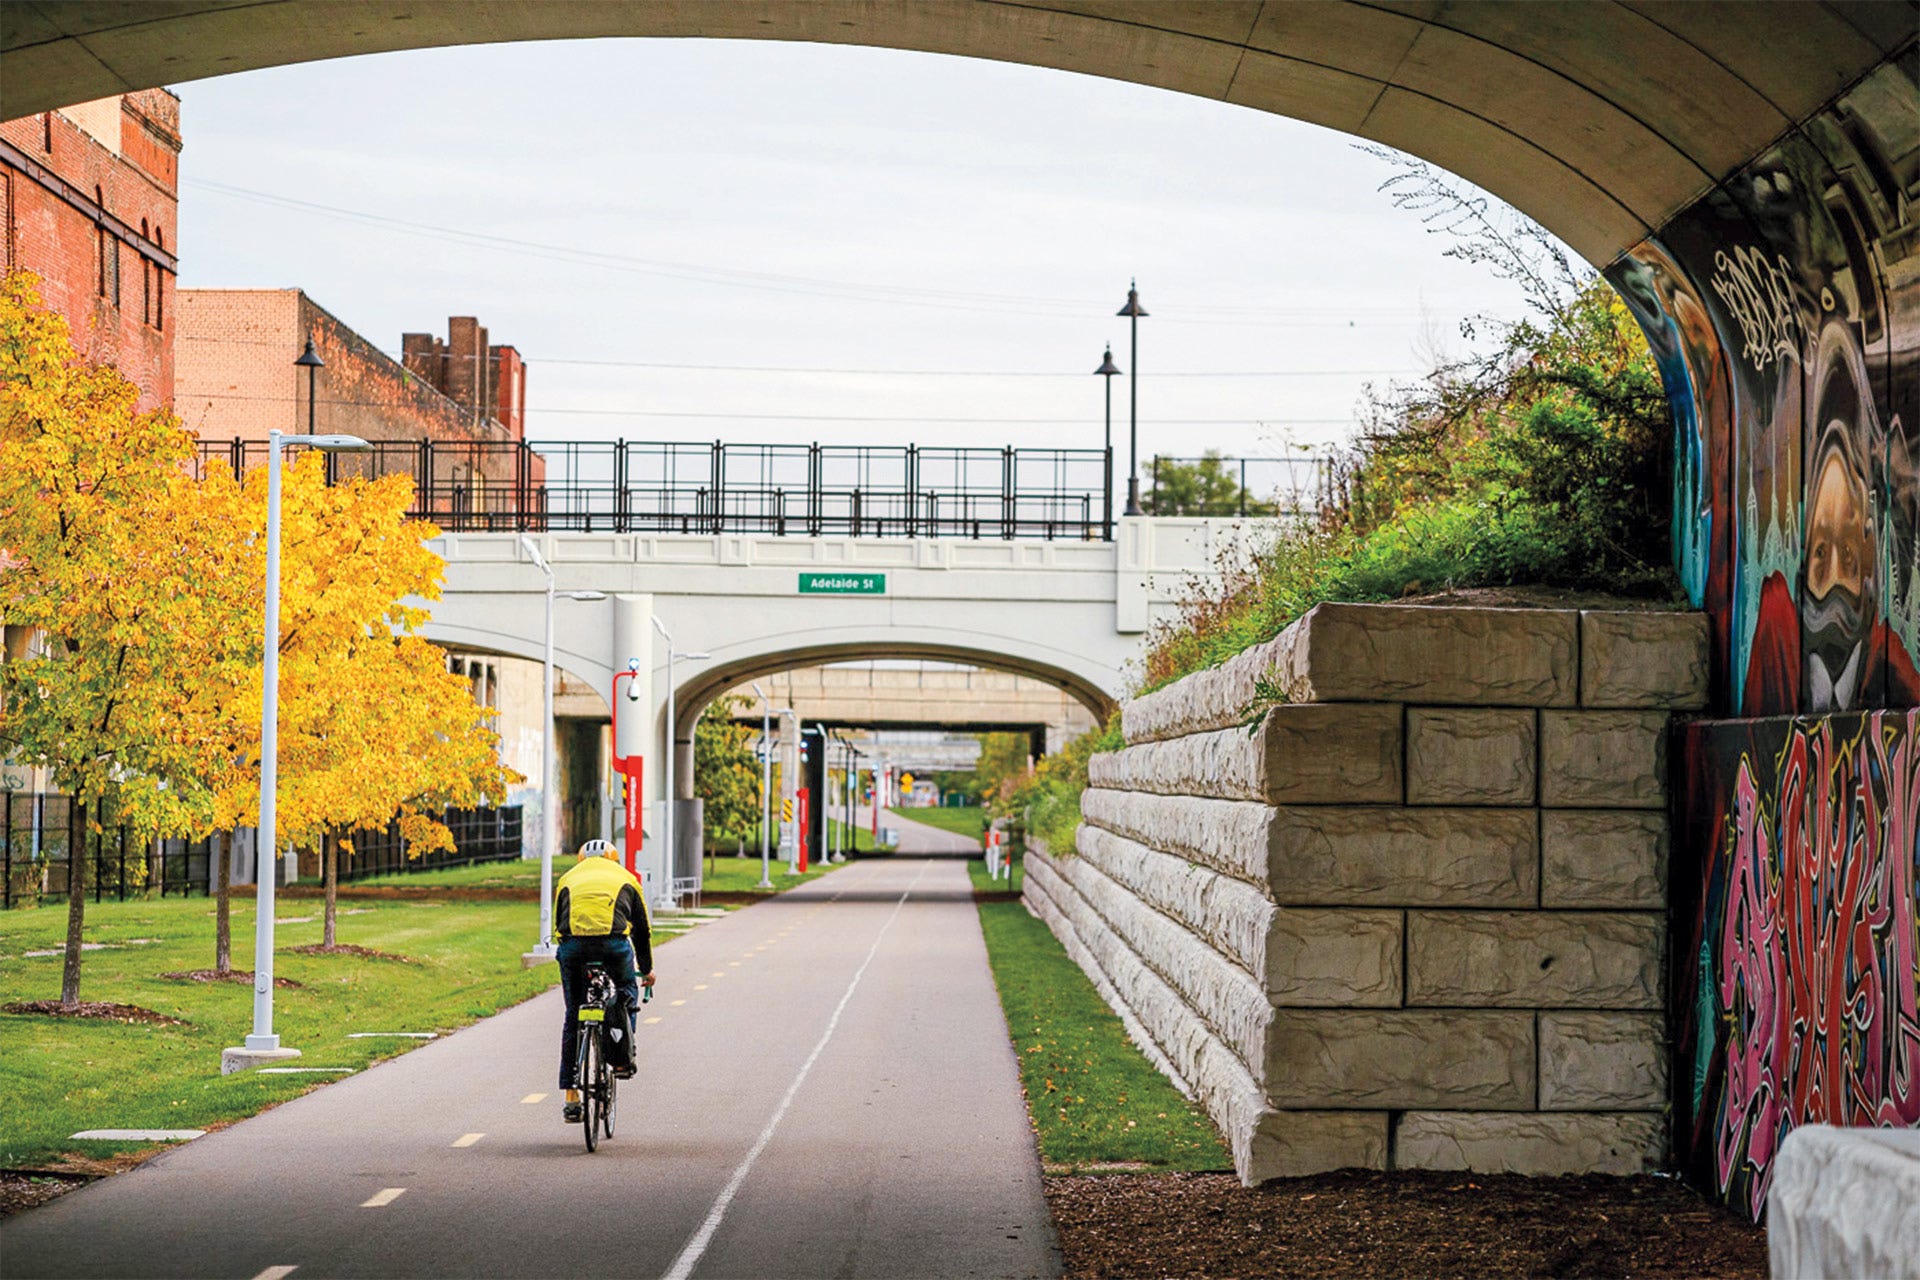 Dequindre is one of the best places to go in Detroit